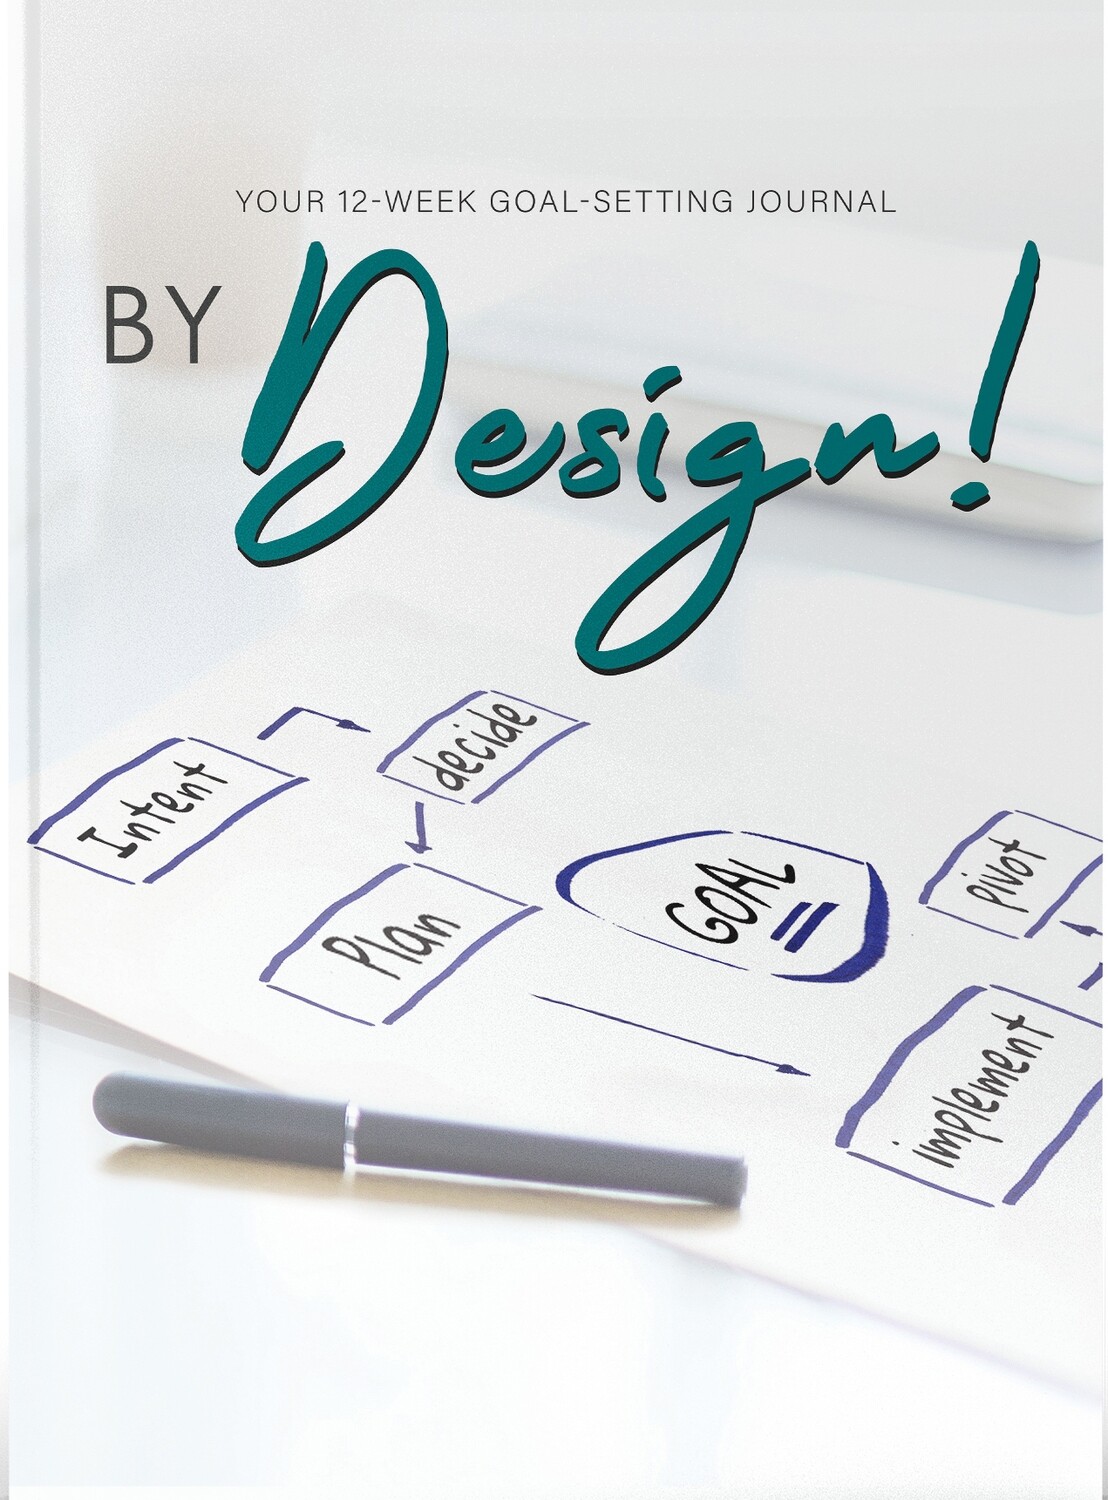 By Design! Your 12-Week Goal Setting Journal